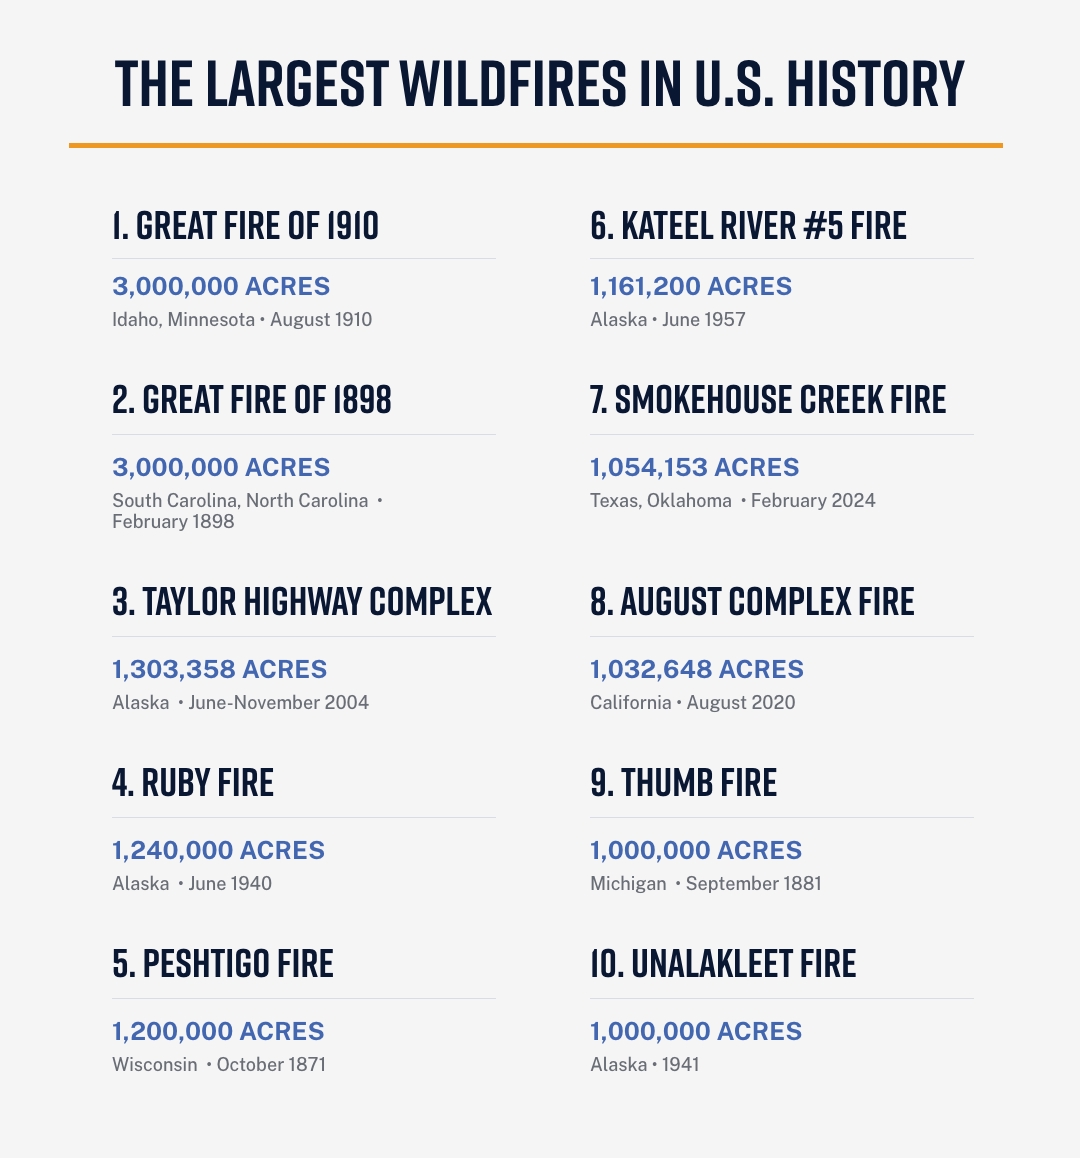 The Largest Wildfires in US History by Area Burned